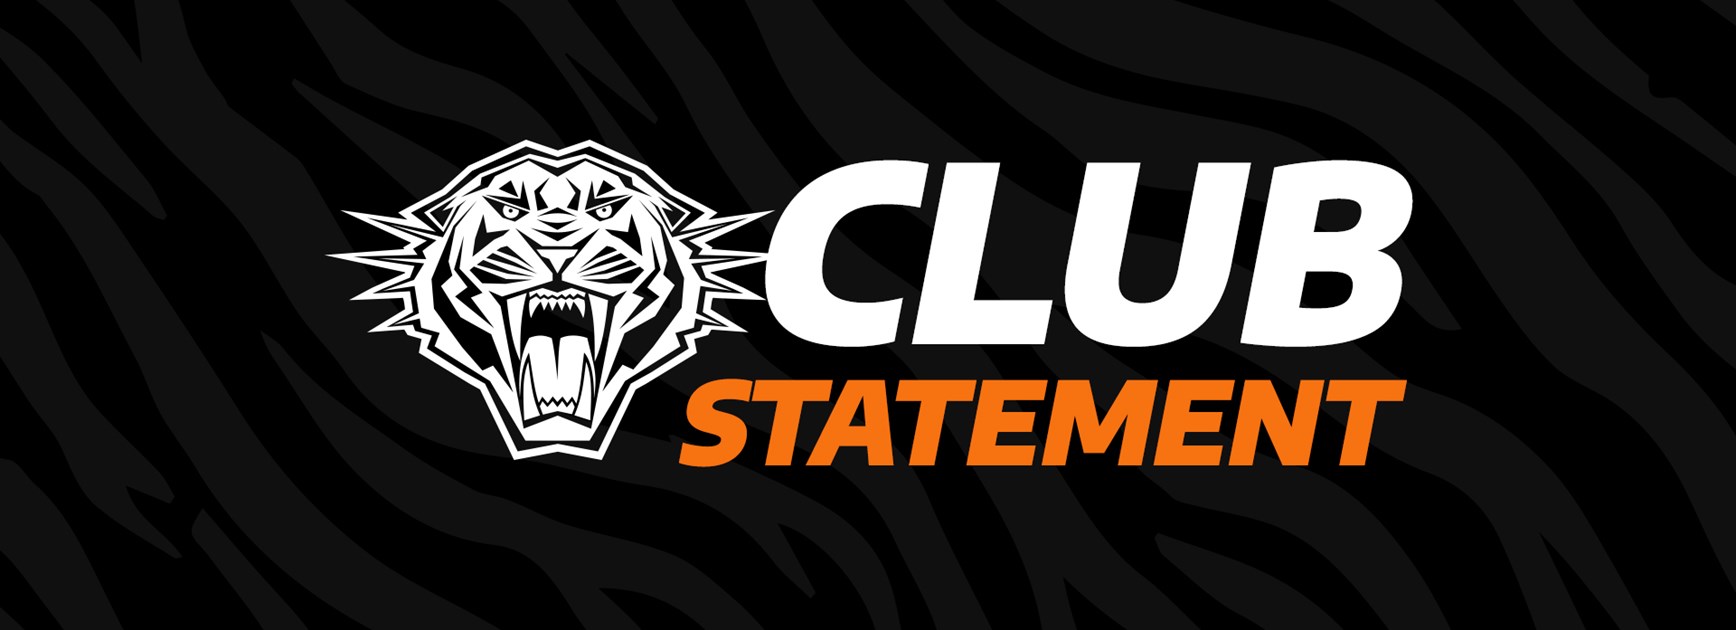 Wests Tigers statement on COVID-19